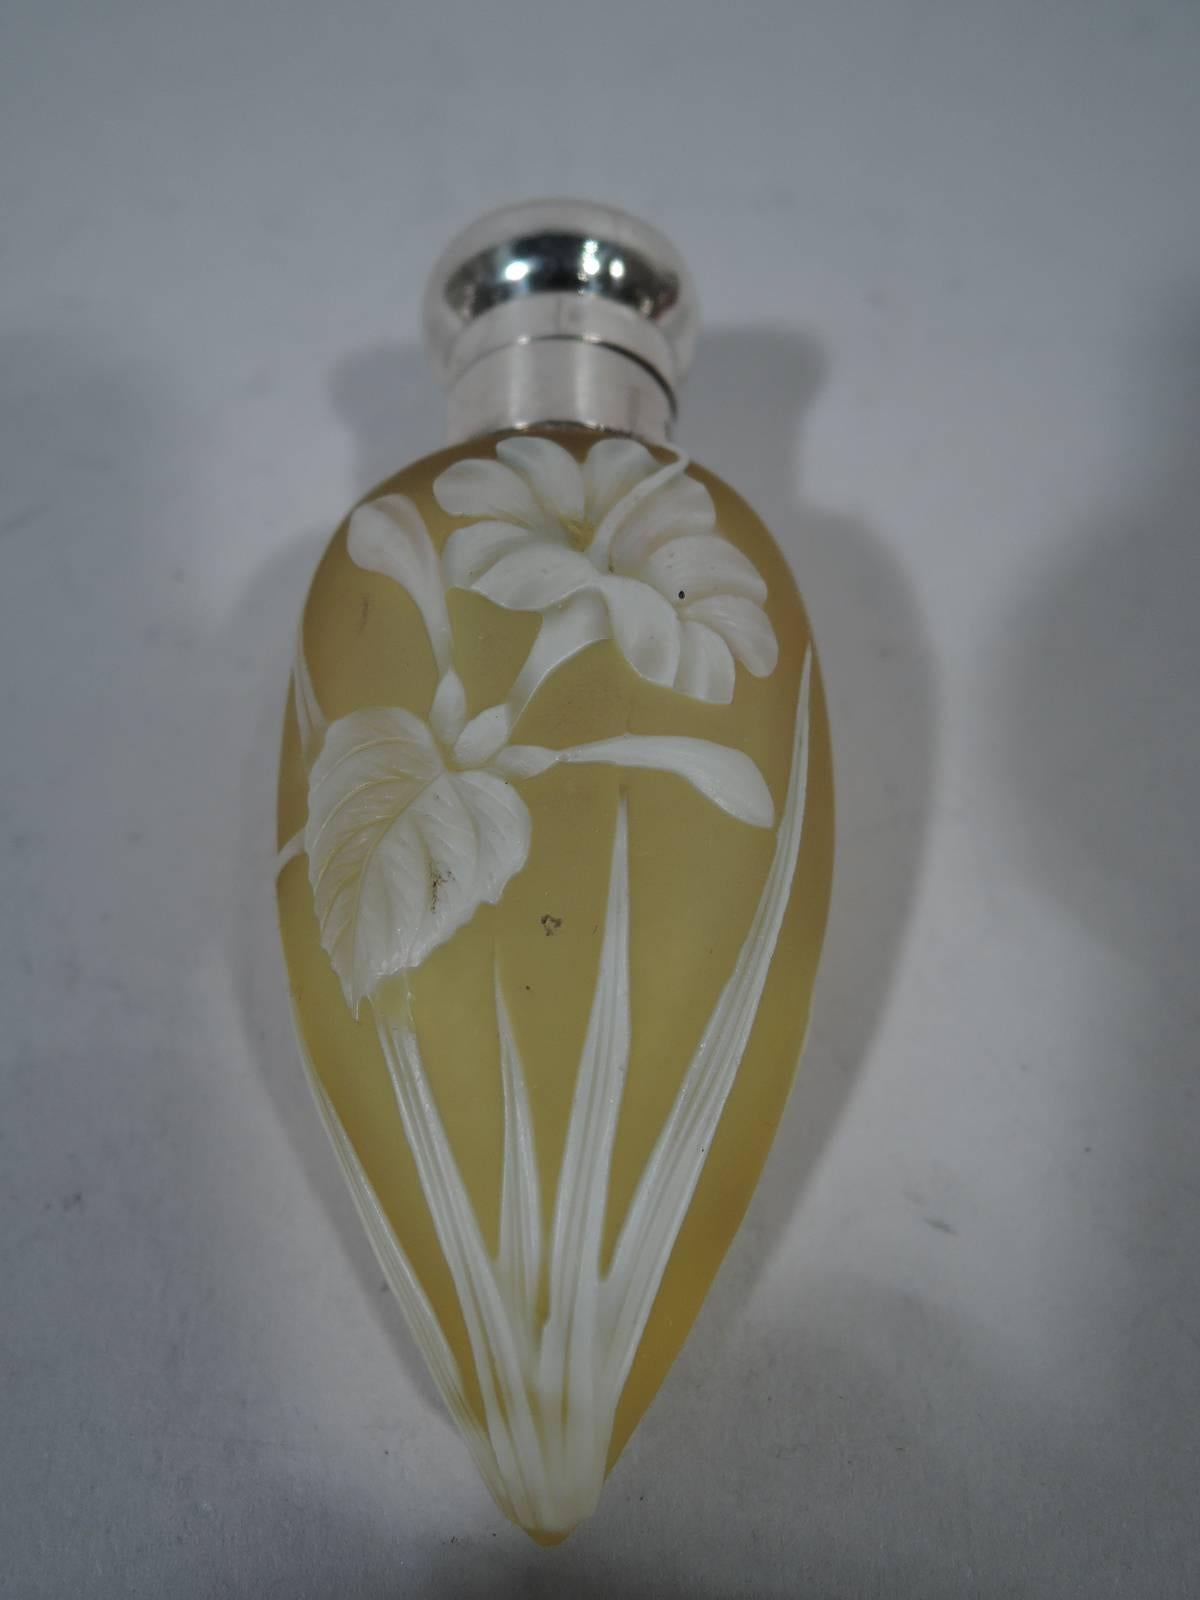 Victorian cameo glass and sterling silver lemon drop perfume. Made by Thomas Wilkinson & Sons in Birmingham in 1896. Glass vial with raised white flowers on soft yellow ground. Short sterling collar and cork-lined bun cover. Hallmarked.